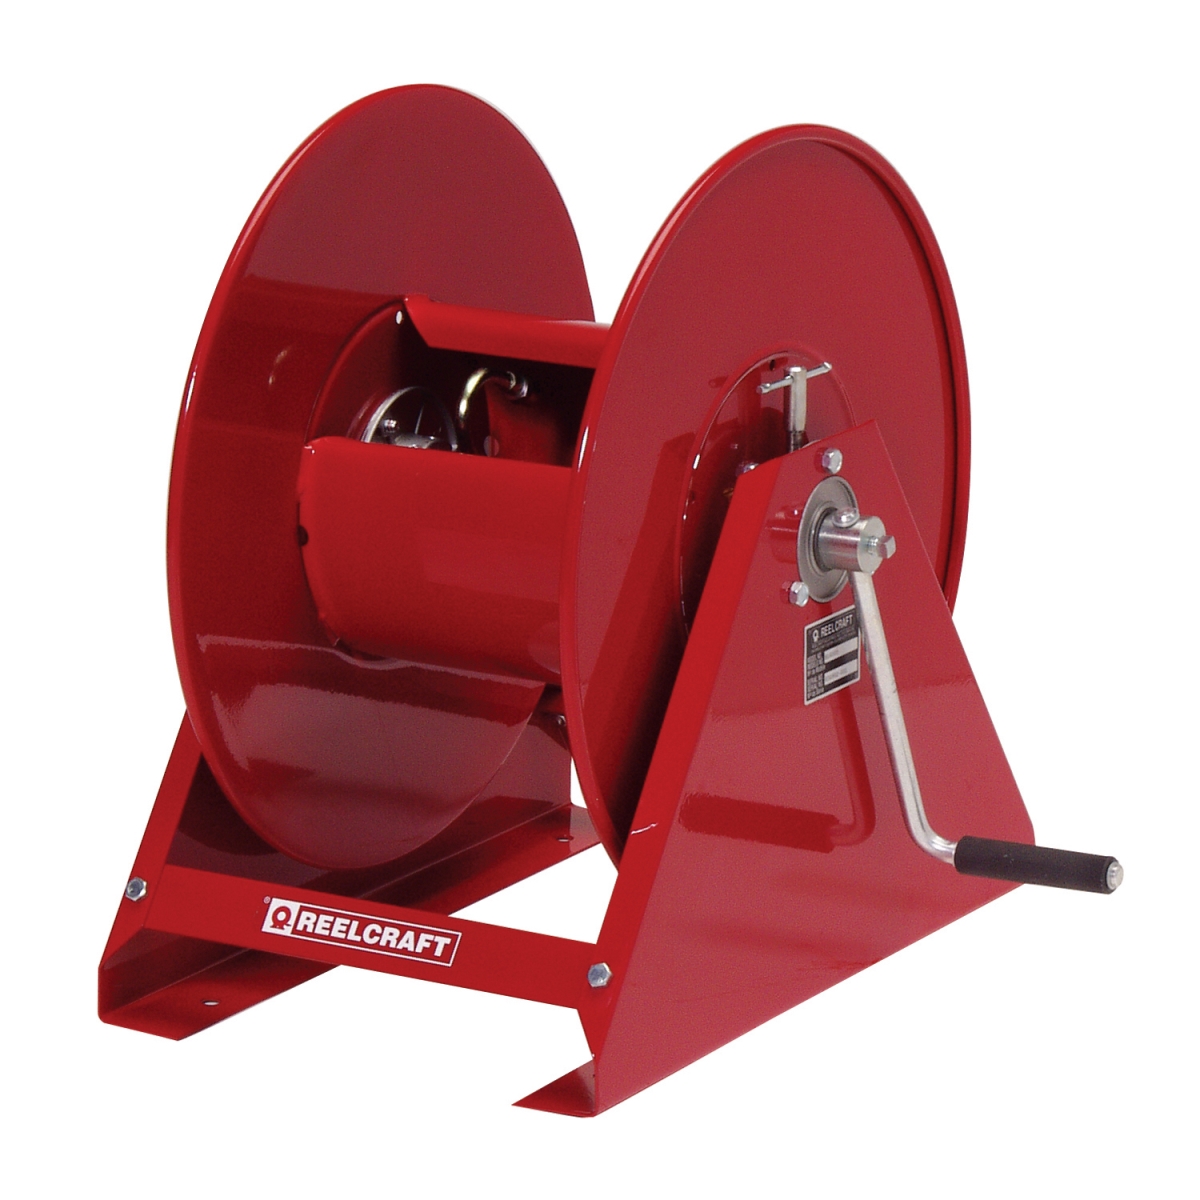 H19000 M 0.75 In. X 80 Ft. Heavy Duty 3000 Psi Oil Without Hose Reel, Red